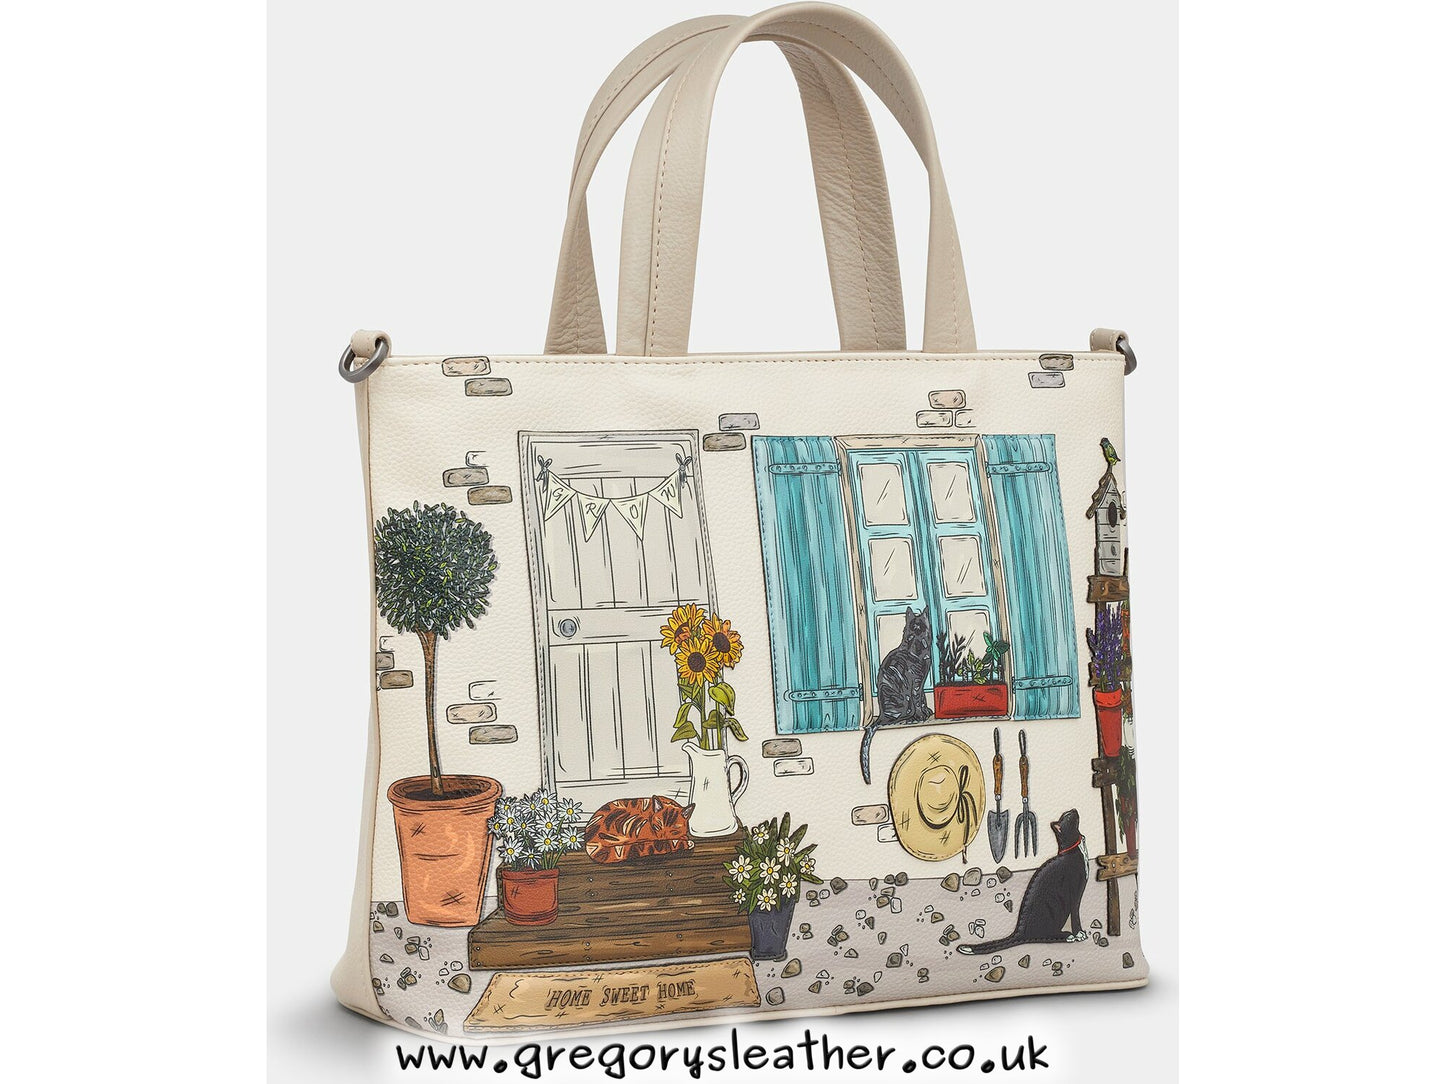 Warm Grey Country Cottage Leather Grab Bag by Yoshi